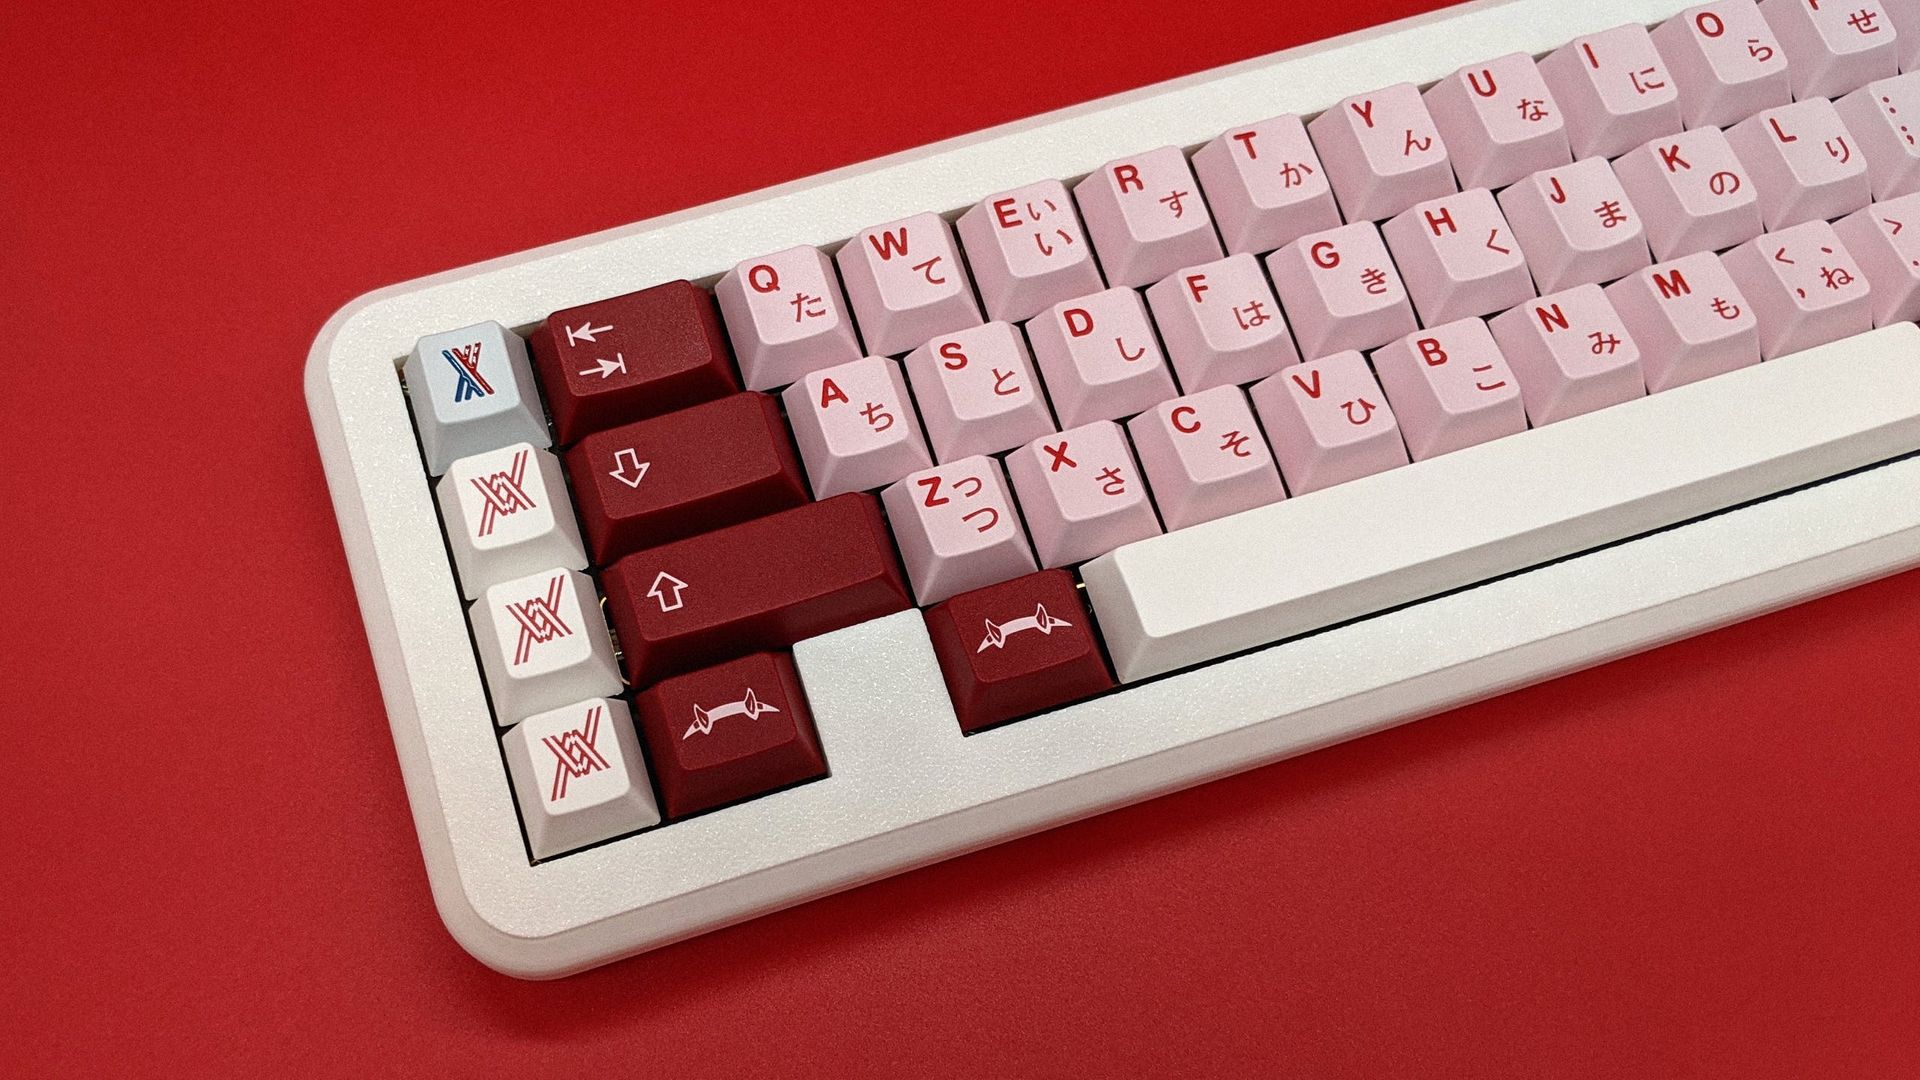 GMK Darling on Liminal on red background